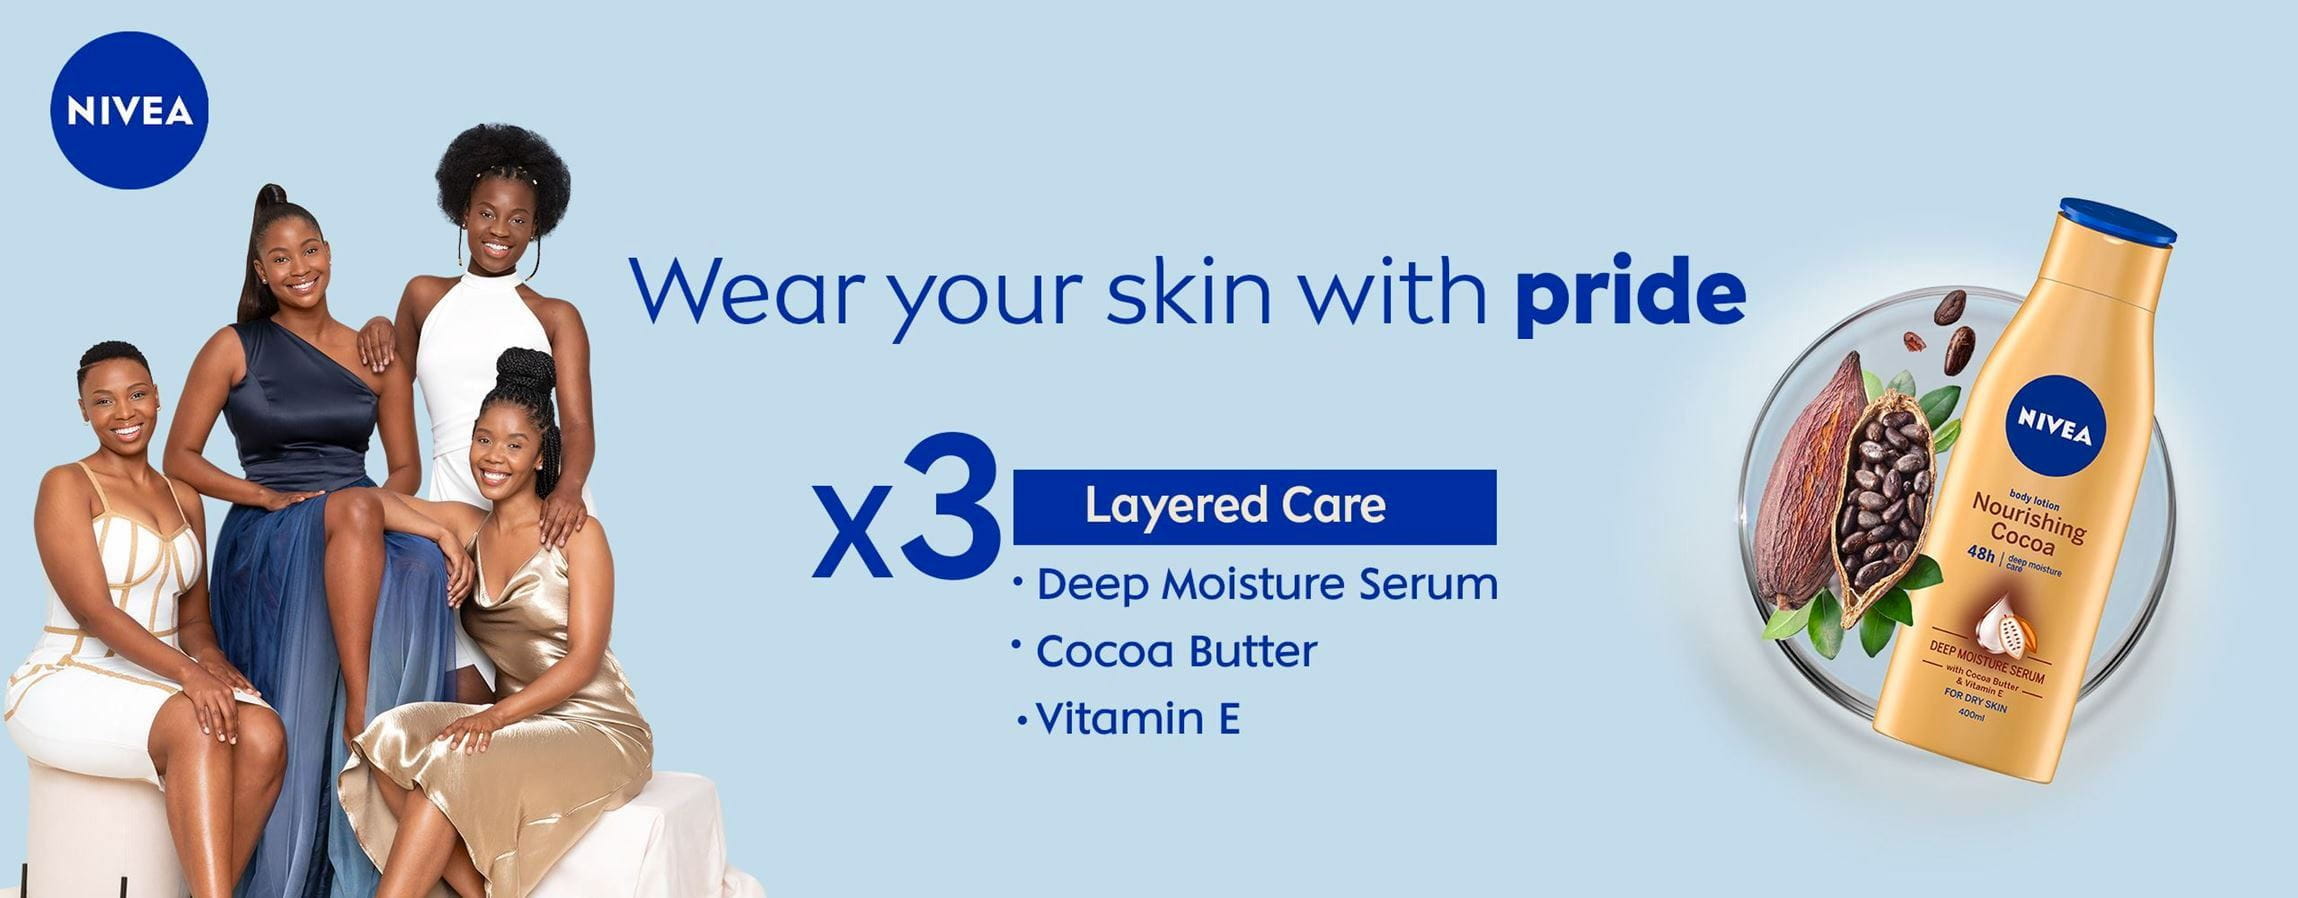 Choose Confidence. Wear Your Skin with Pride with NIVEA Nourishing Cocoa